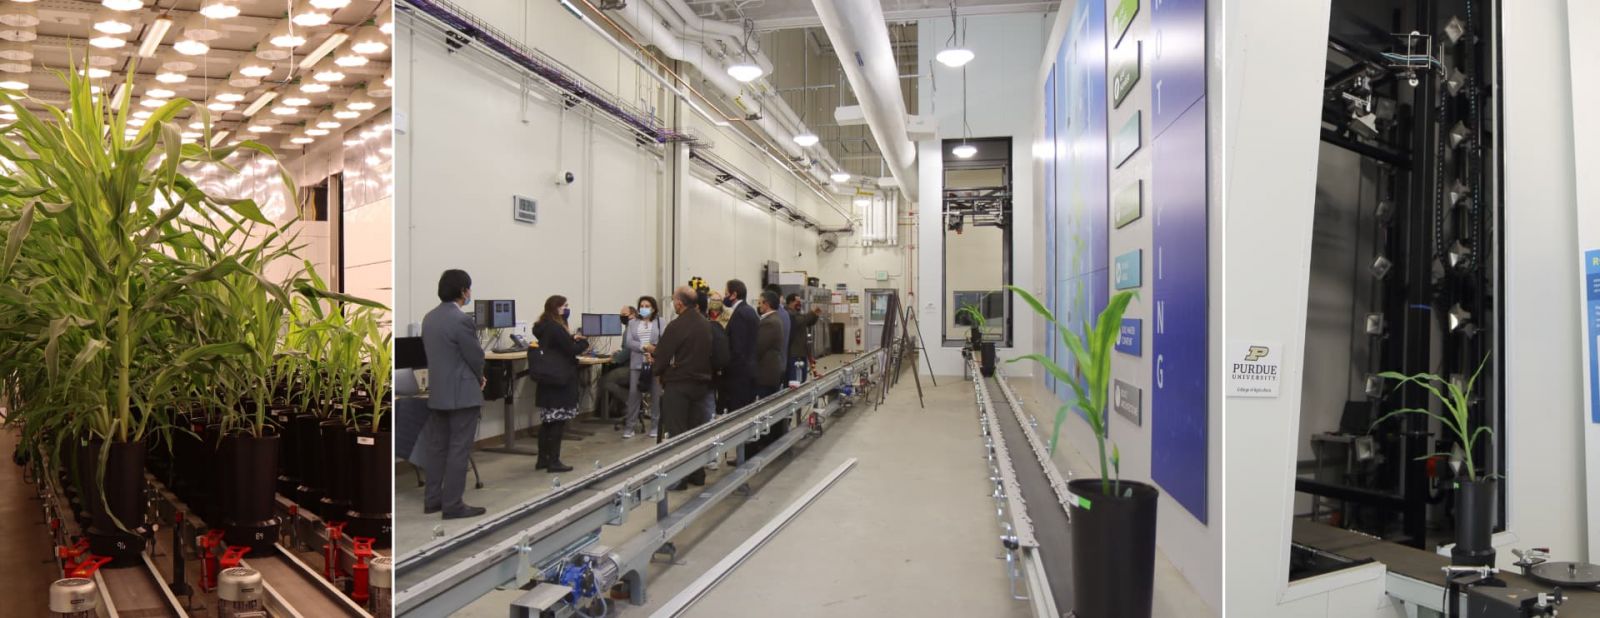 As visitors from the Universidad Nacional de San Agustín (UNSA) in Arequipa, Peru, learn about Purdue’s state-of-the-art Ag Alumni Seed Phenotyping Facility, plants are automatically transported via conveyor belt from a climate-controlled greenhouse-like room (left) into an imaging and sensor booth (right) for nondestructive measurements and analyses including plant height, leaf angle, nutrient content, stem diameter, soil water content and root architecture. Data collected by researchers are unlocking insights into phenotypic traits related to plant health, stress and fitness. The research will support a broad range of applications in plant science, crop breeding, agricultural engineering, molecular biology and plant pathology. (Purdue University photos/John O’Malley)